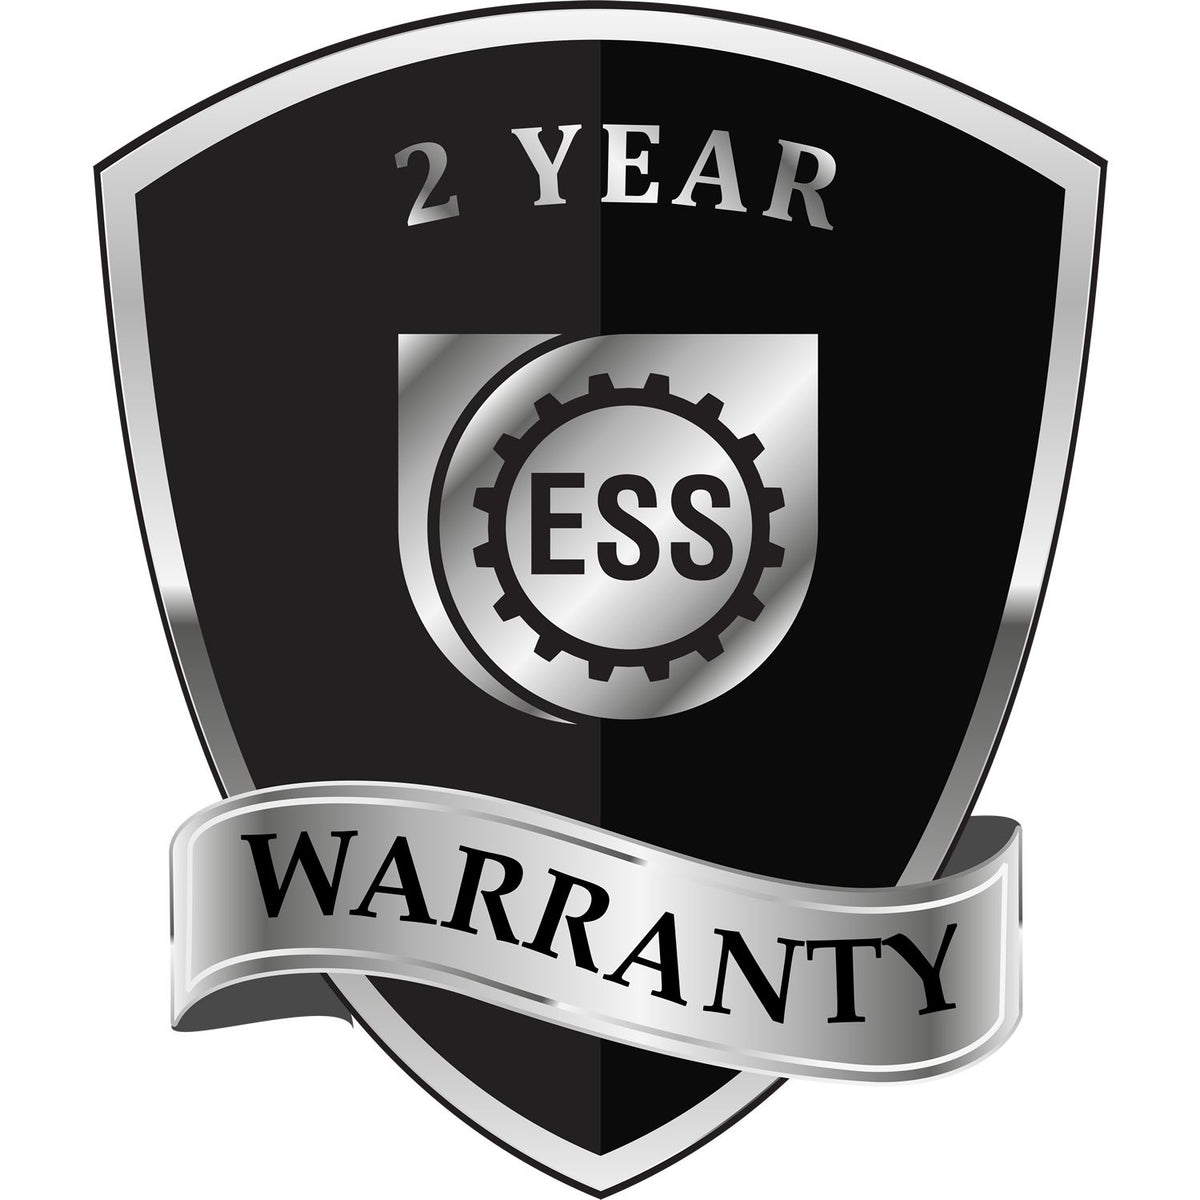 A black and silver badge or emblem showing warranty information for the New Jersey Geologist Desk Seal